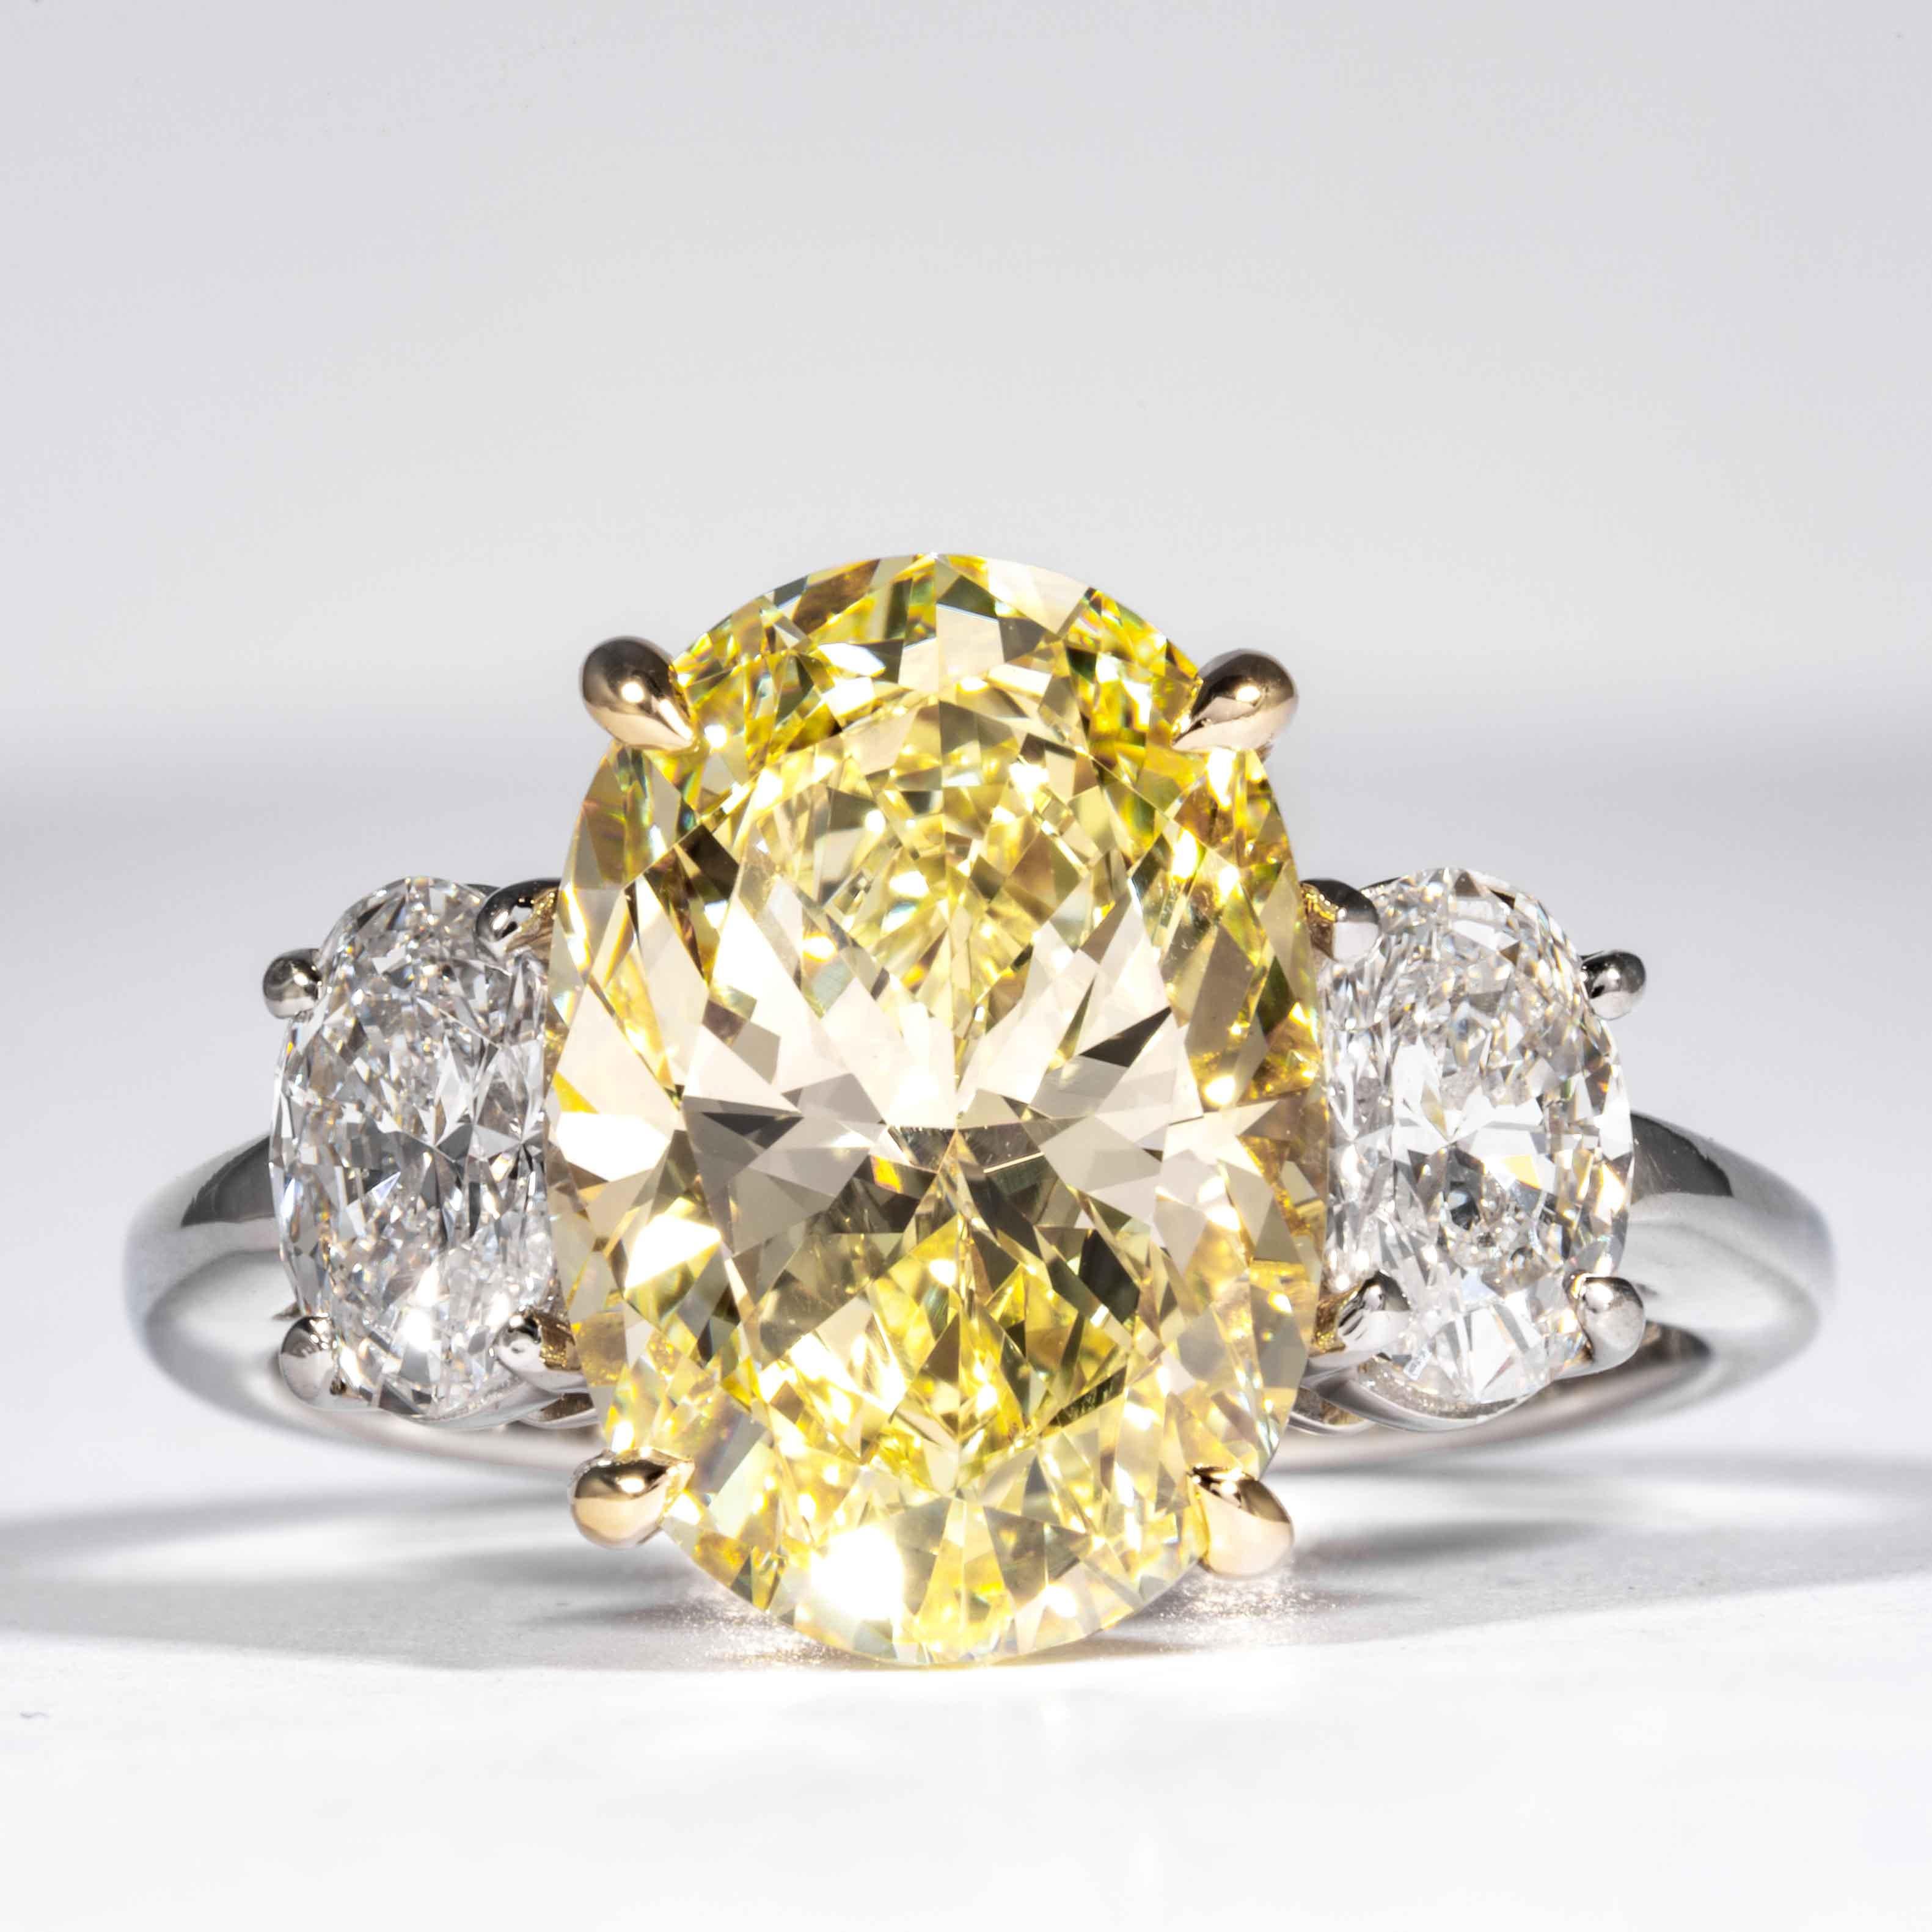 This fancy yellow oval cut diamond is offered by Shreve, Crump & Low.  This fancy yellow oval diamond is custom set in a handcrafted Shreve, Crump & Low platinum and 18 karat yellow gold 3 stone ring consisting of 1 oval cut yellow diamond weighing